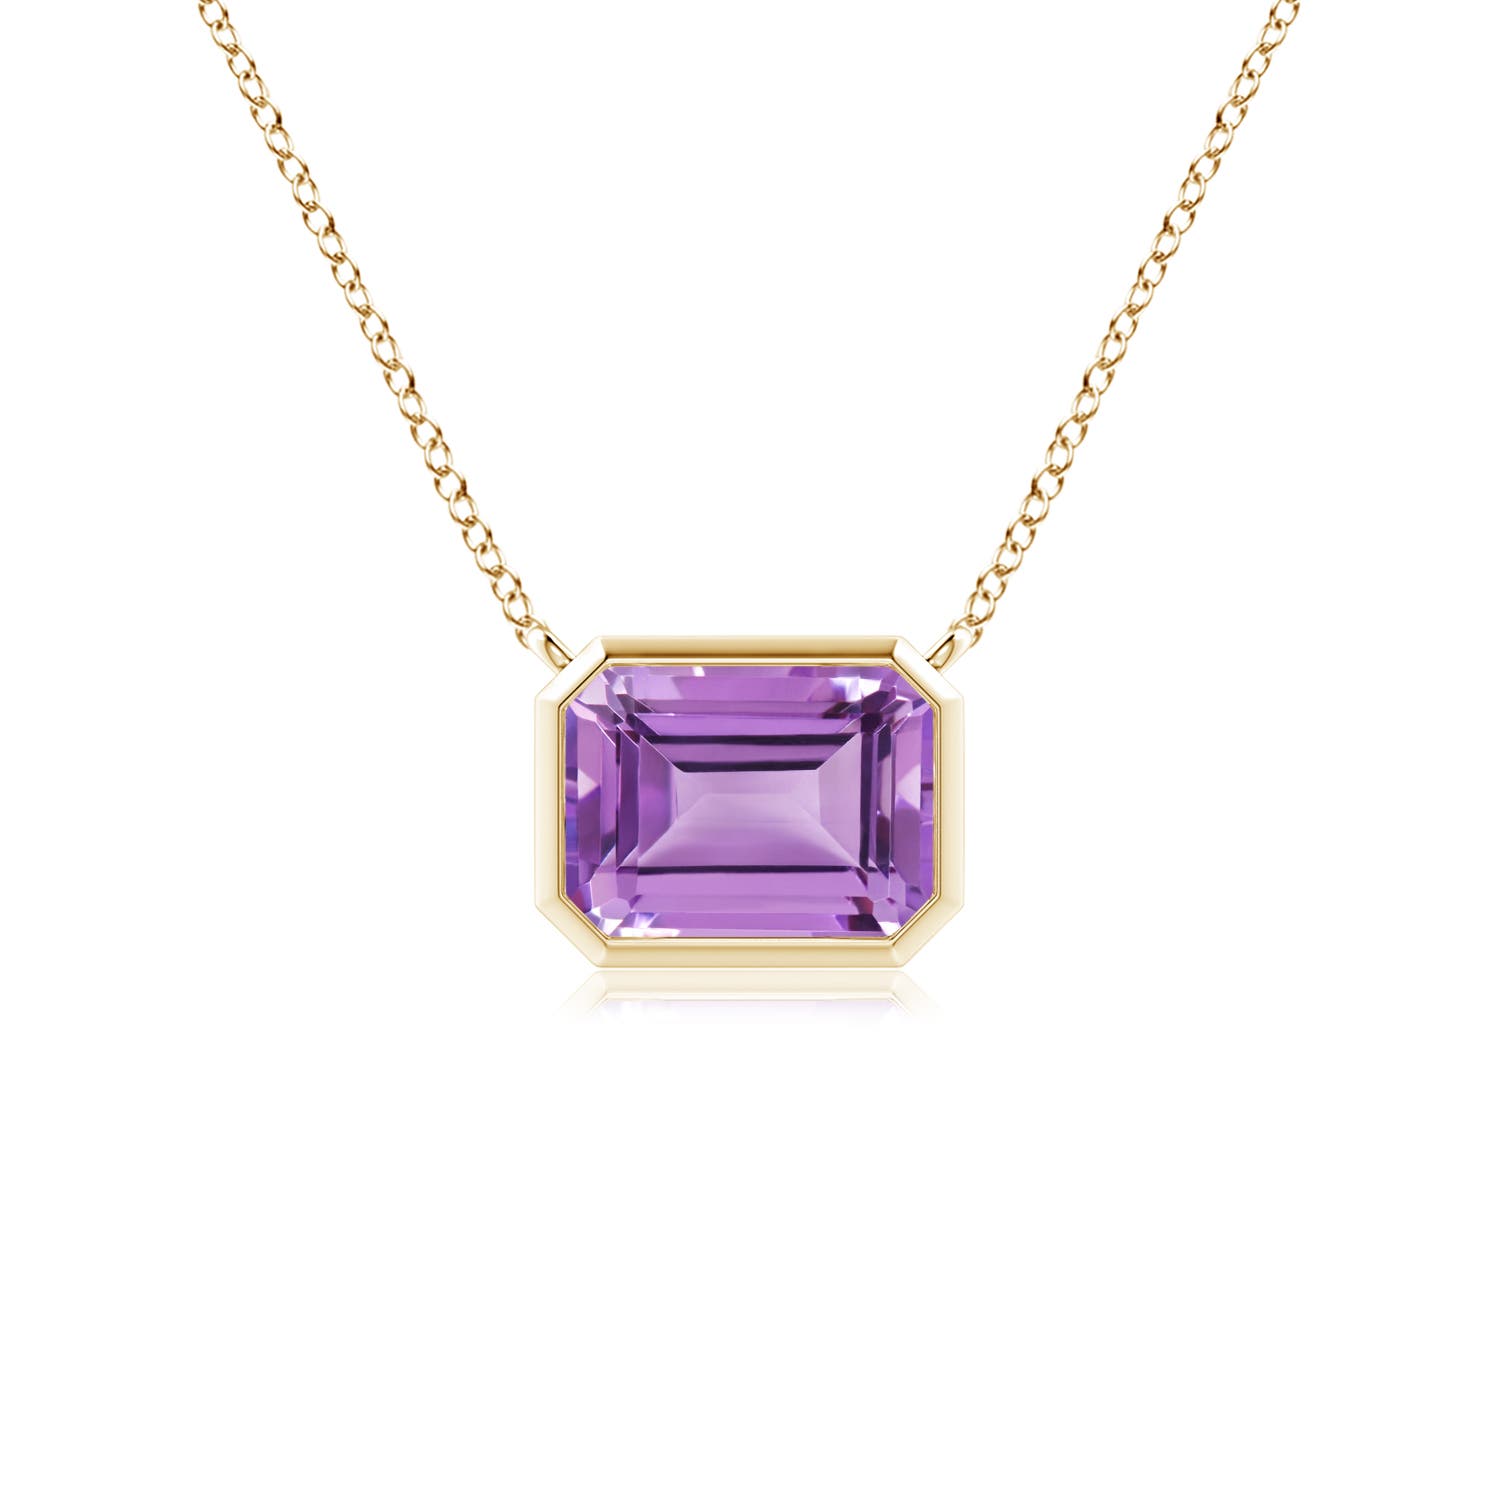 A - Amethyst / 0.9 CT / 14 KT Yellow Gold